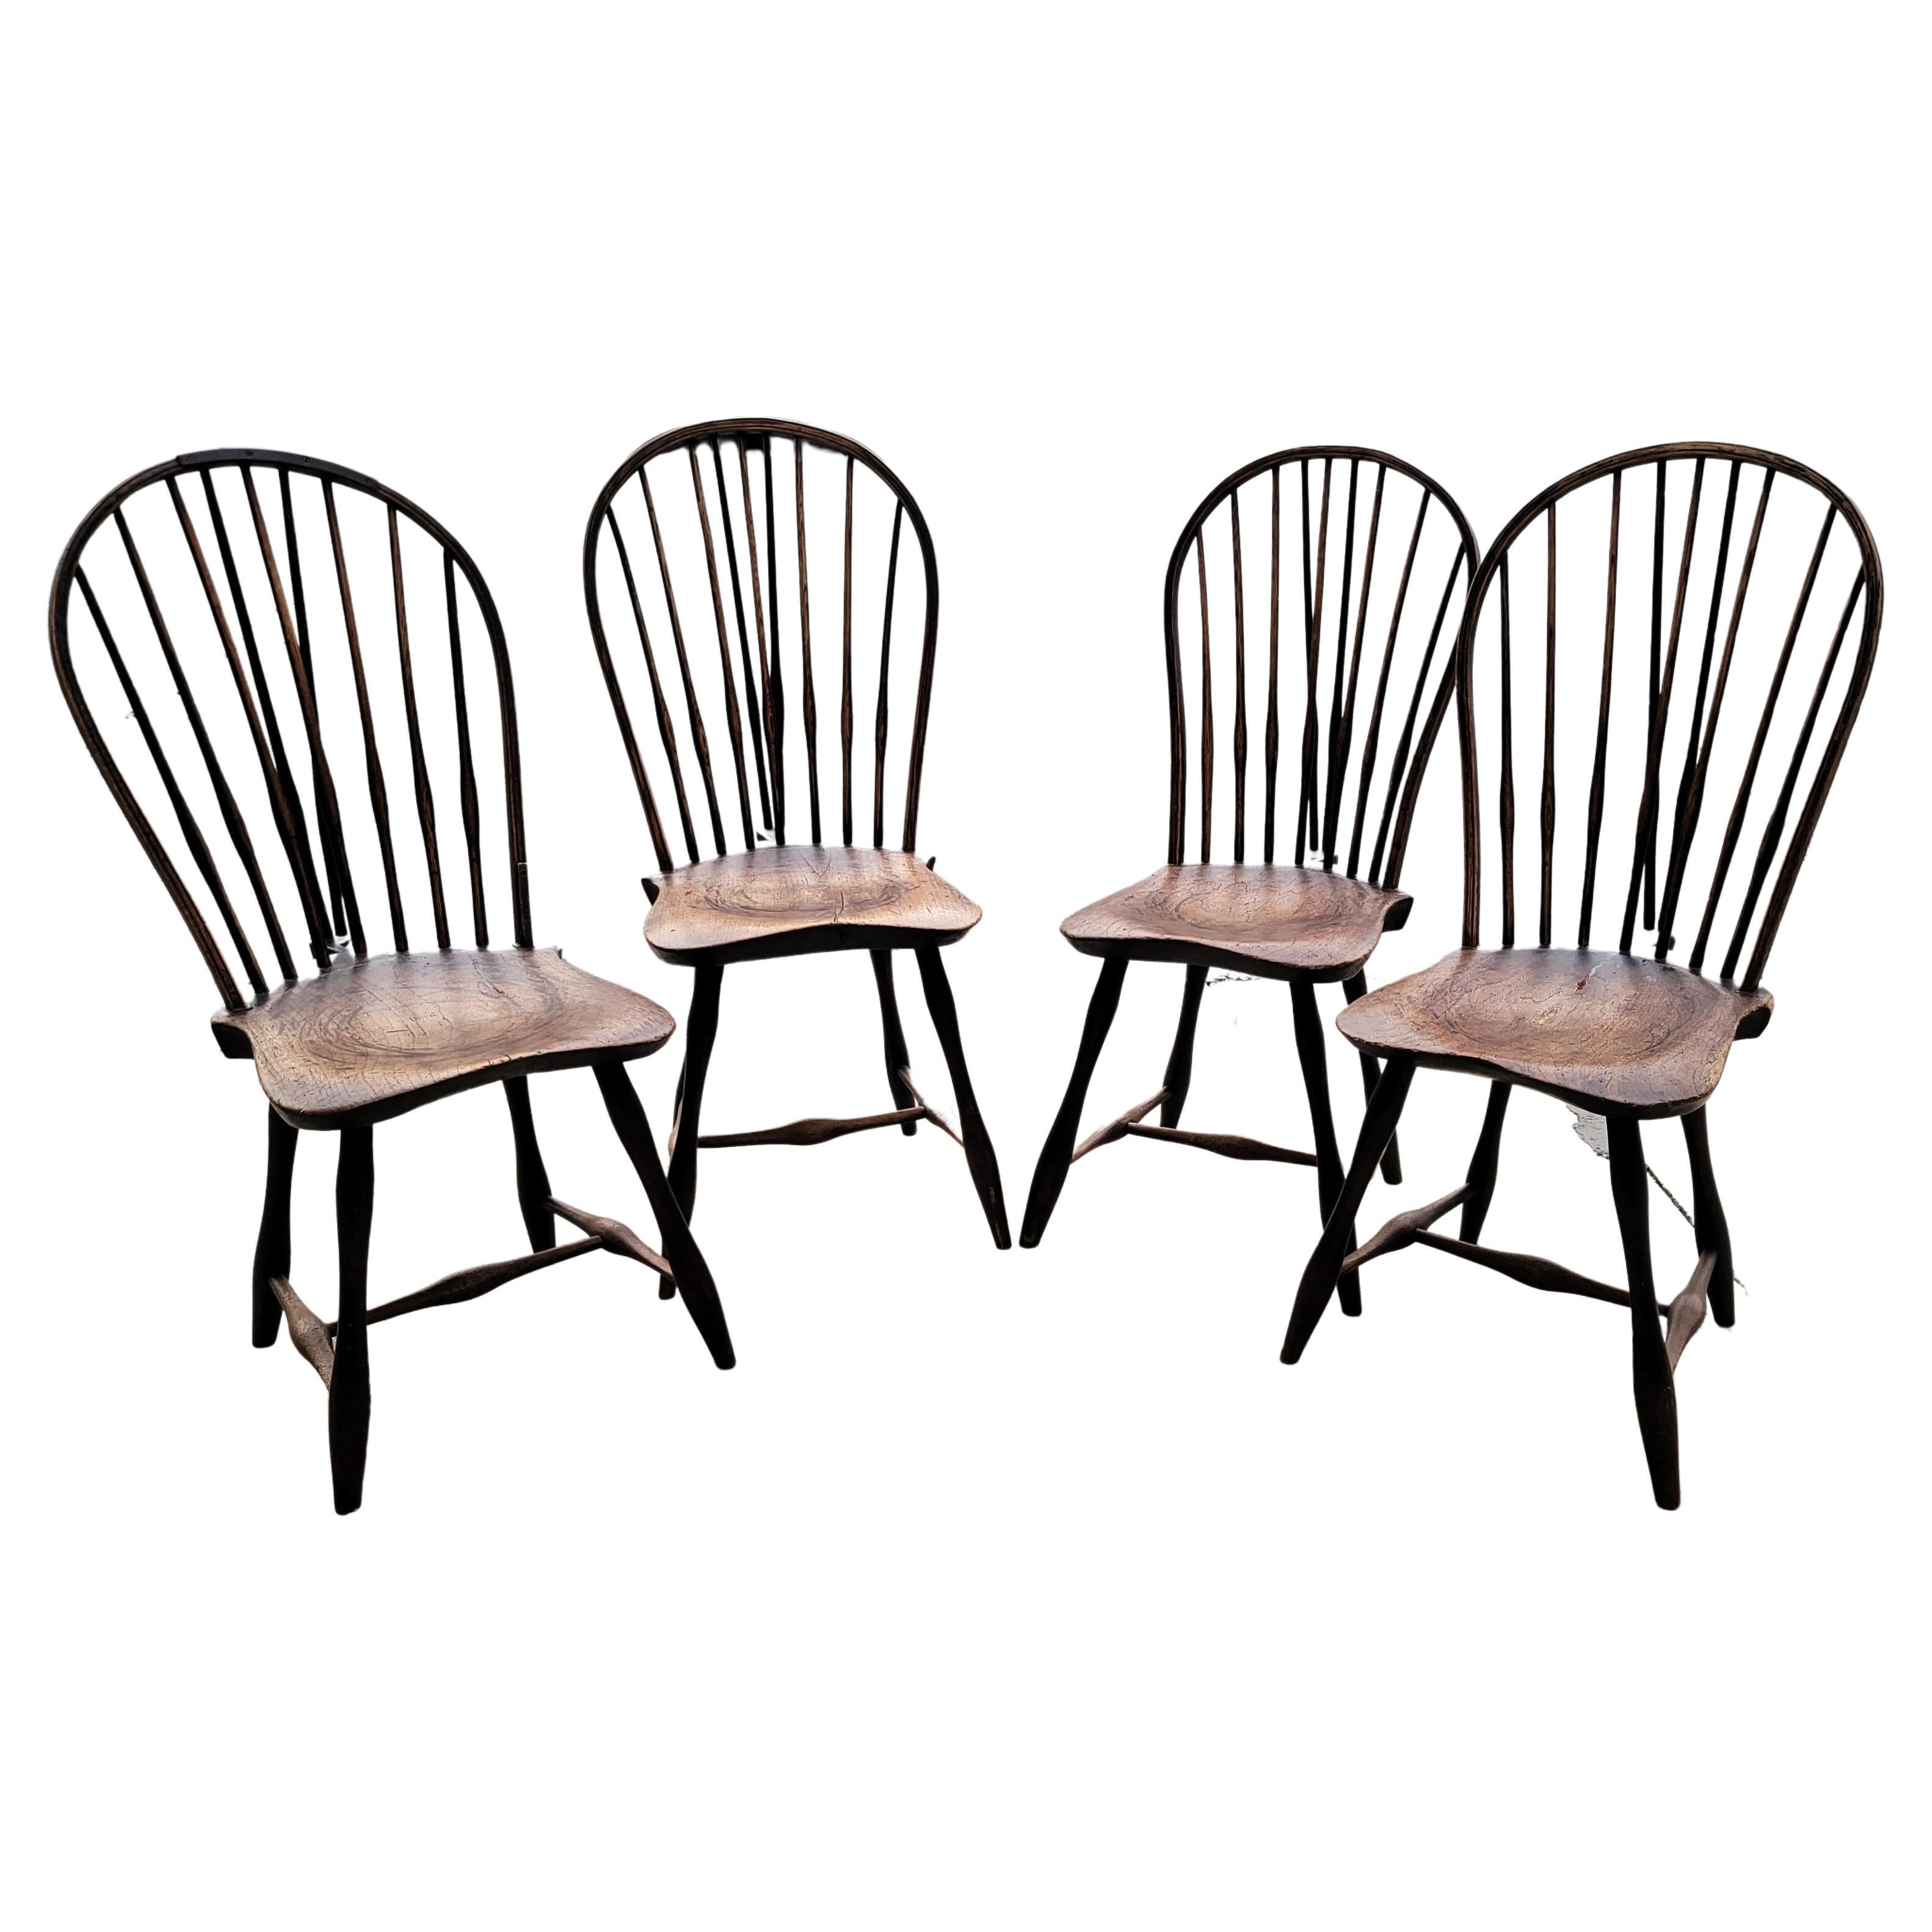 How much is a Windsor chair worth?